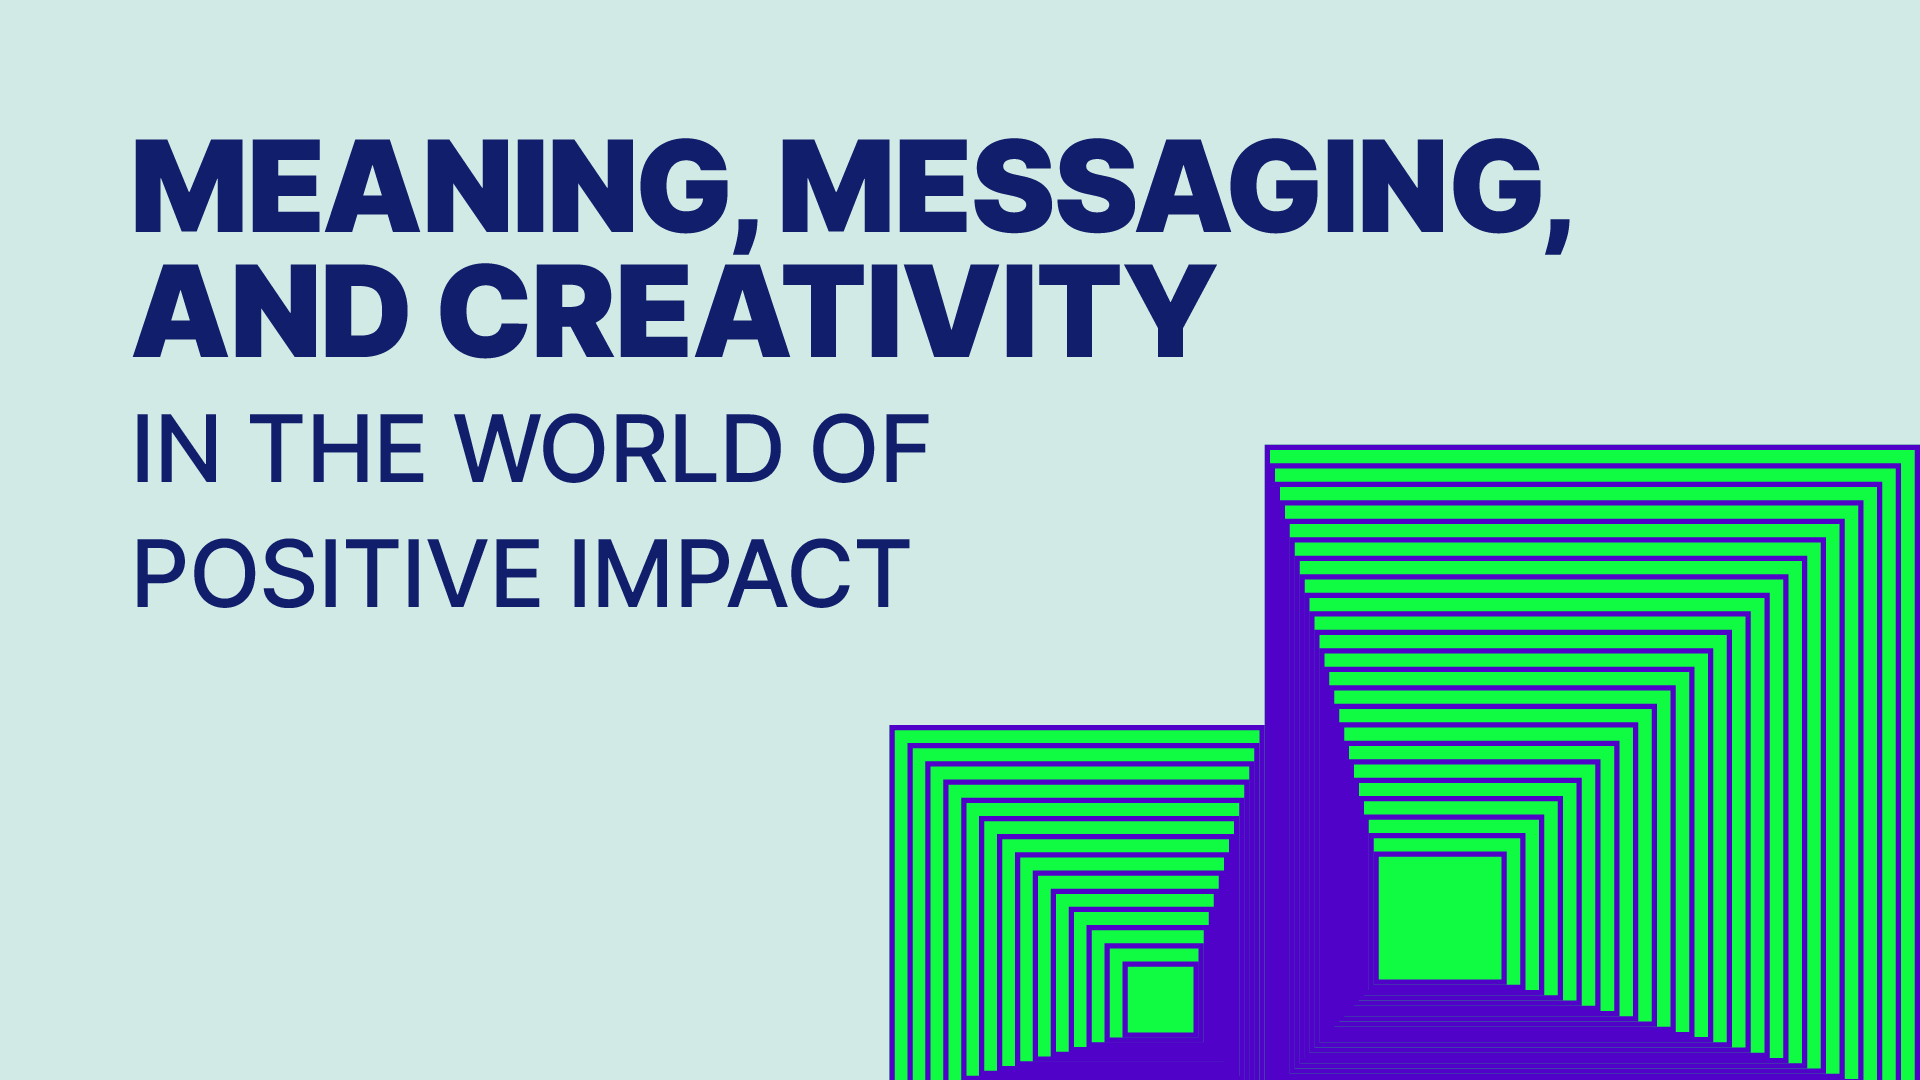 Meaning, messaging, and creativity in the world of positive impact